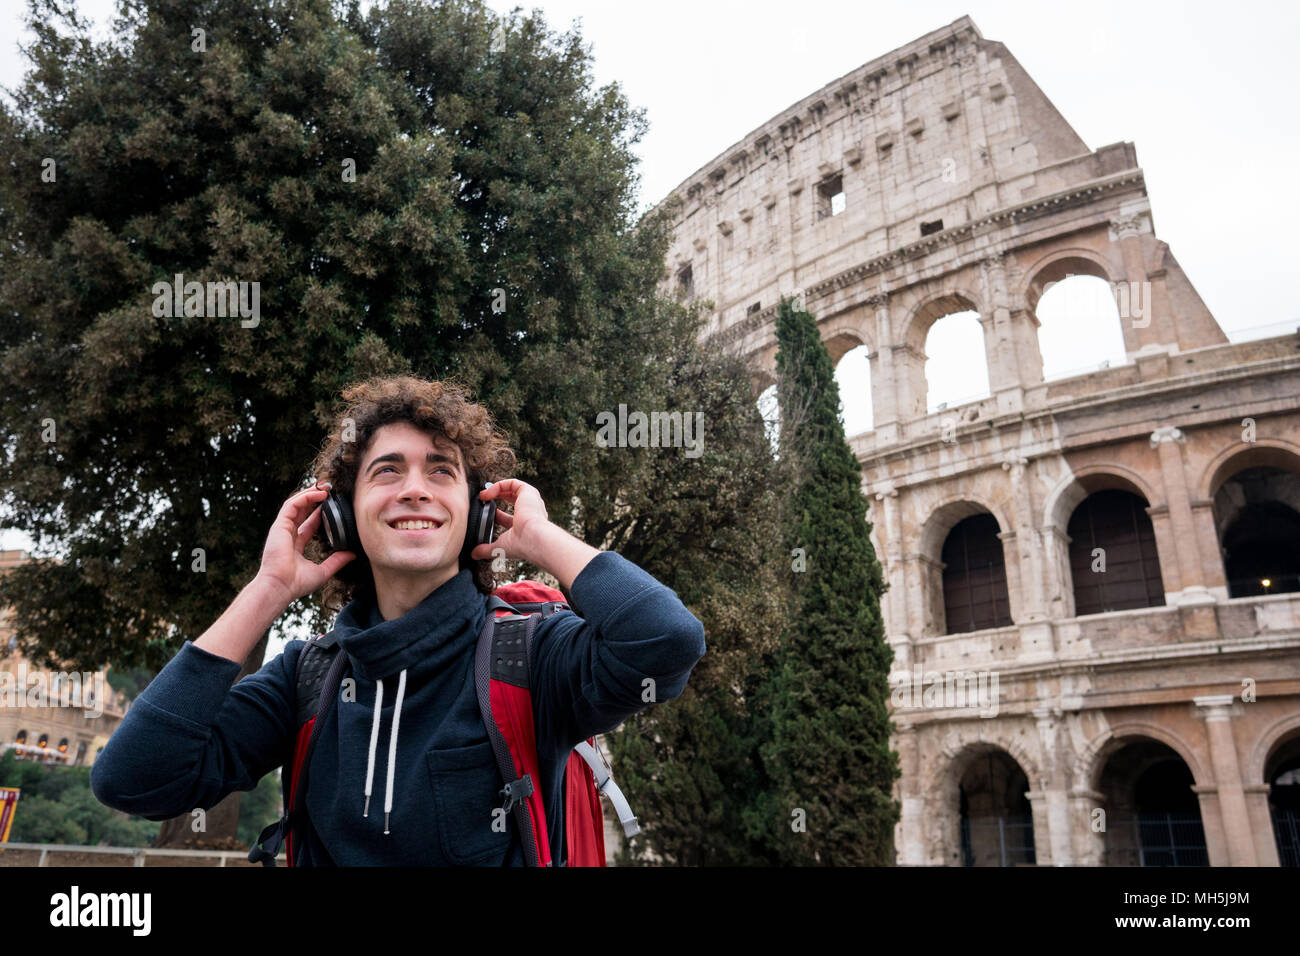 Handsome young man with headphones listening to music in front of Colosseum in Rome Stock Photo